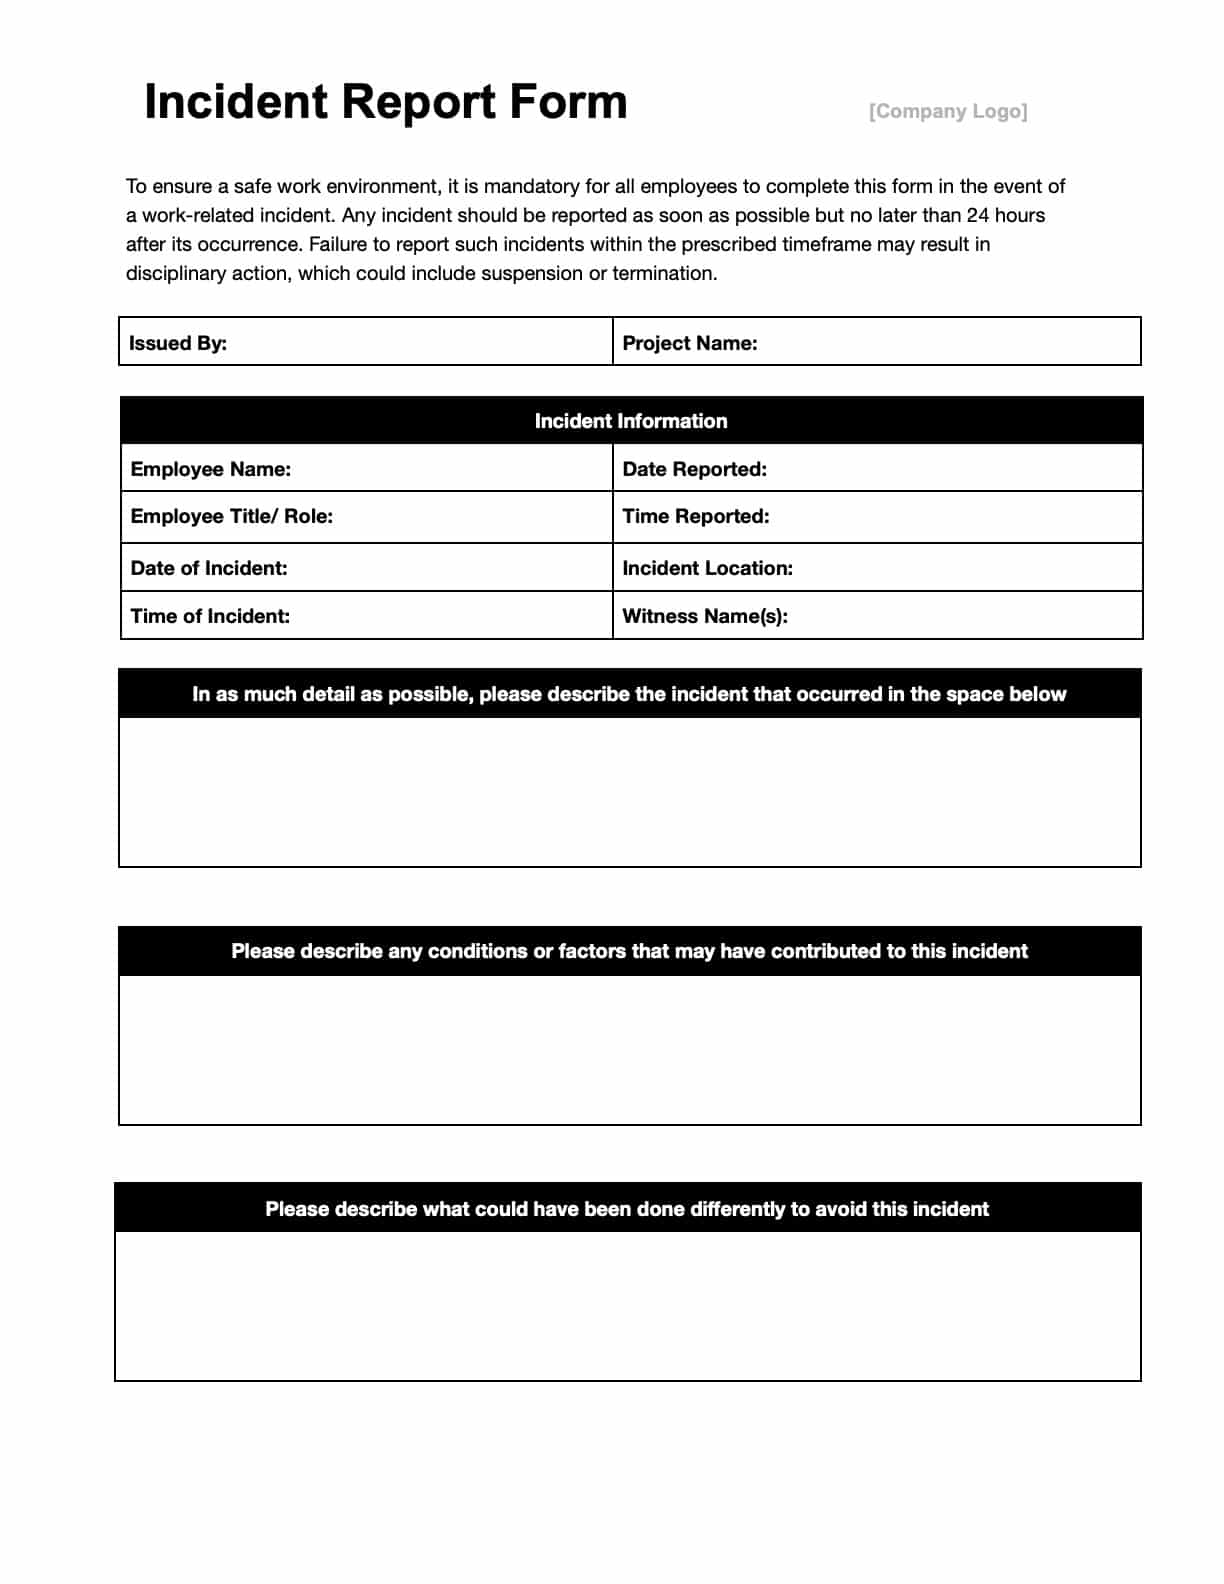 Incident Report Templates Download & Print for Free!